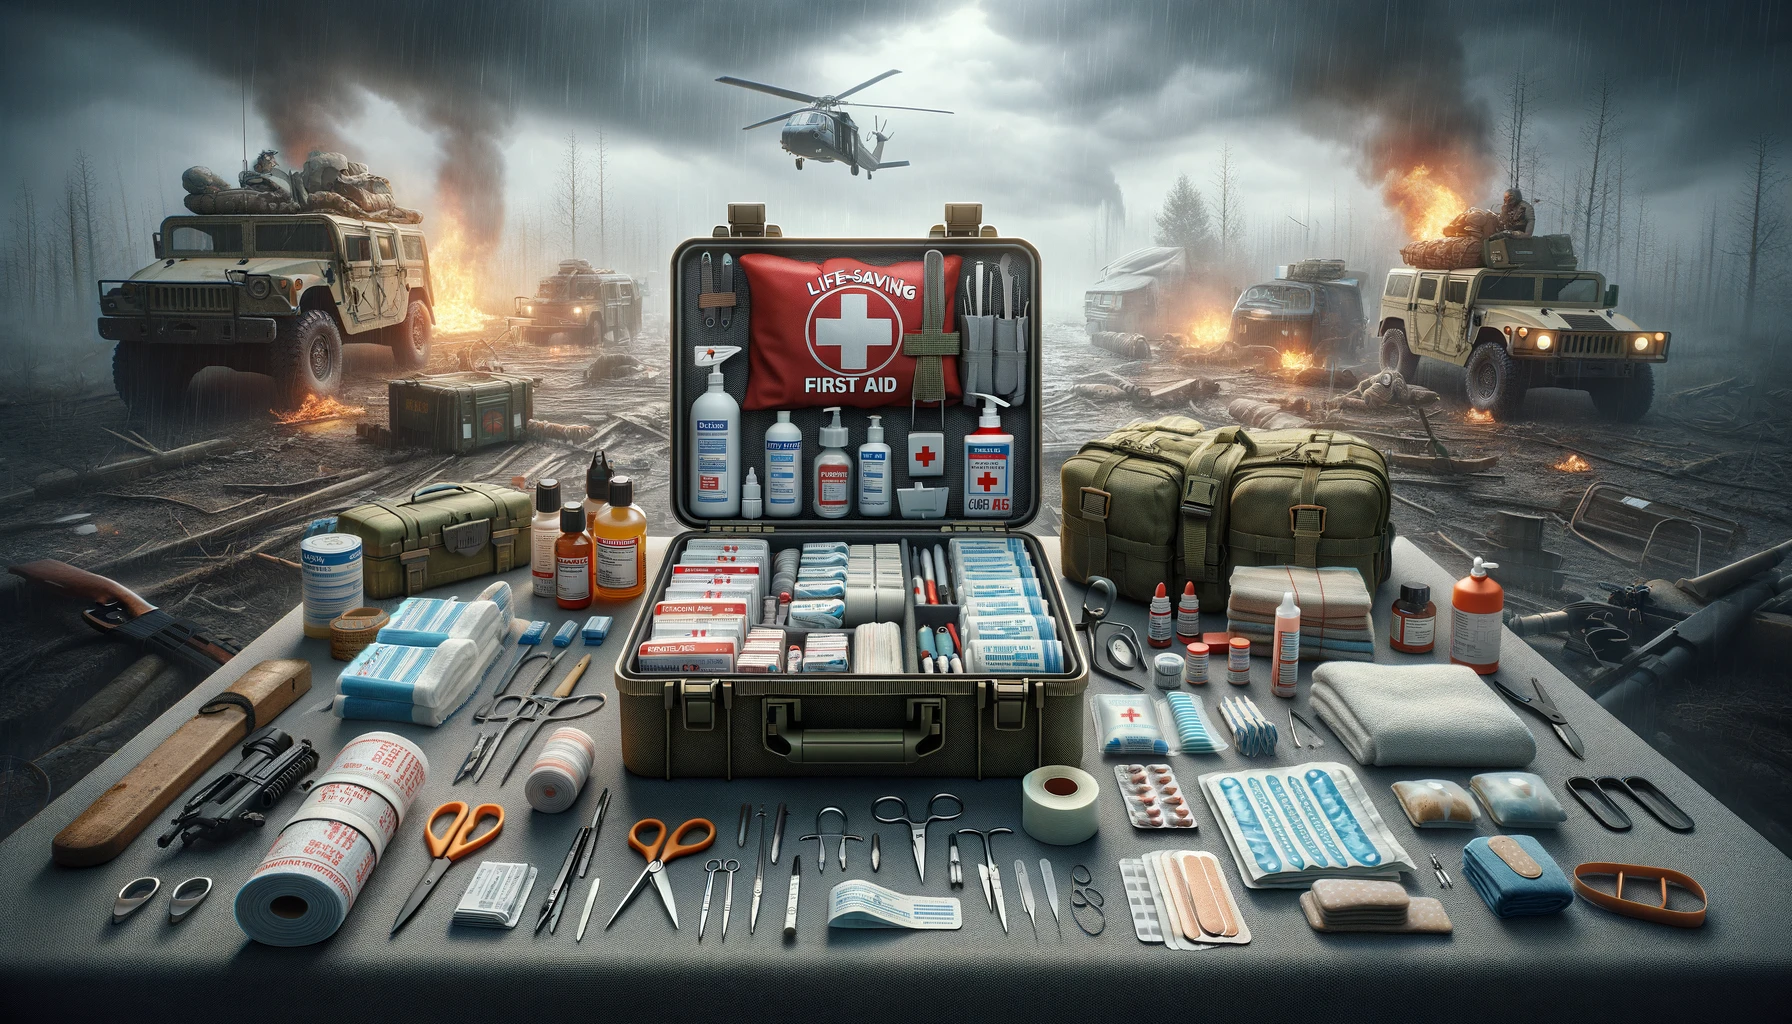 A comprehensive first aid kit open, displaying medical supplies, set against a backdrop highlighting the importance of medical preparedness in emergencies